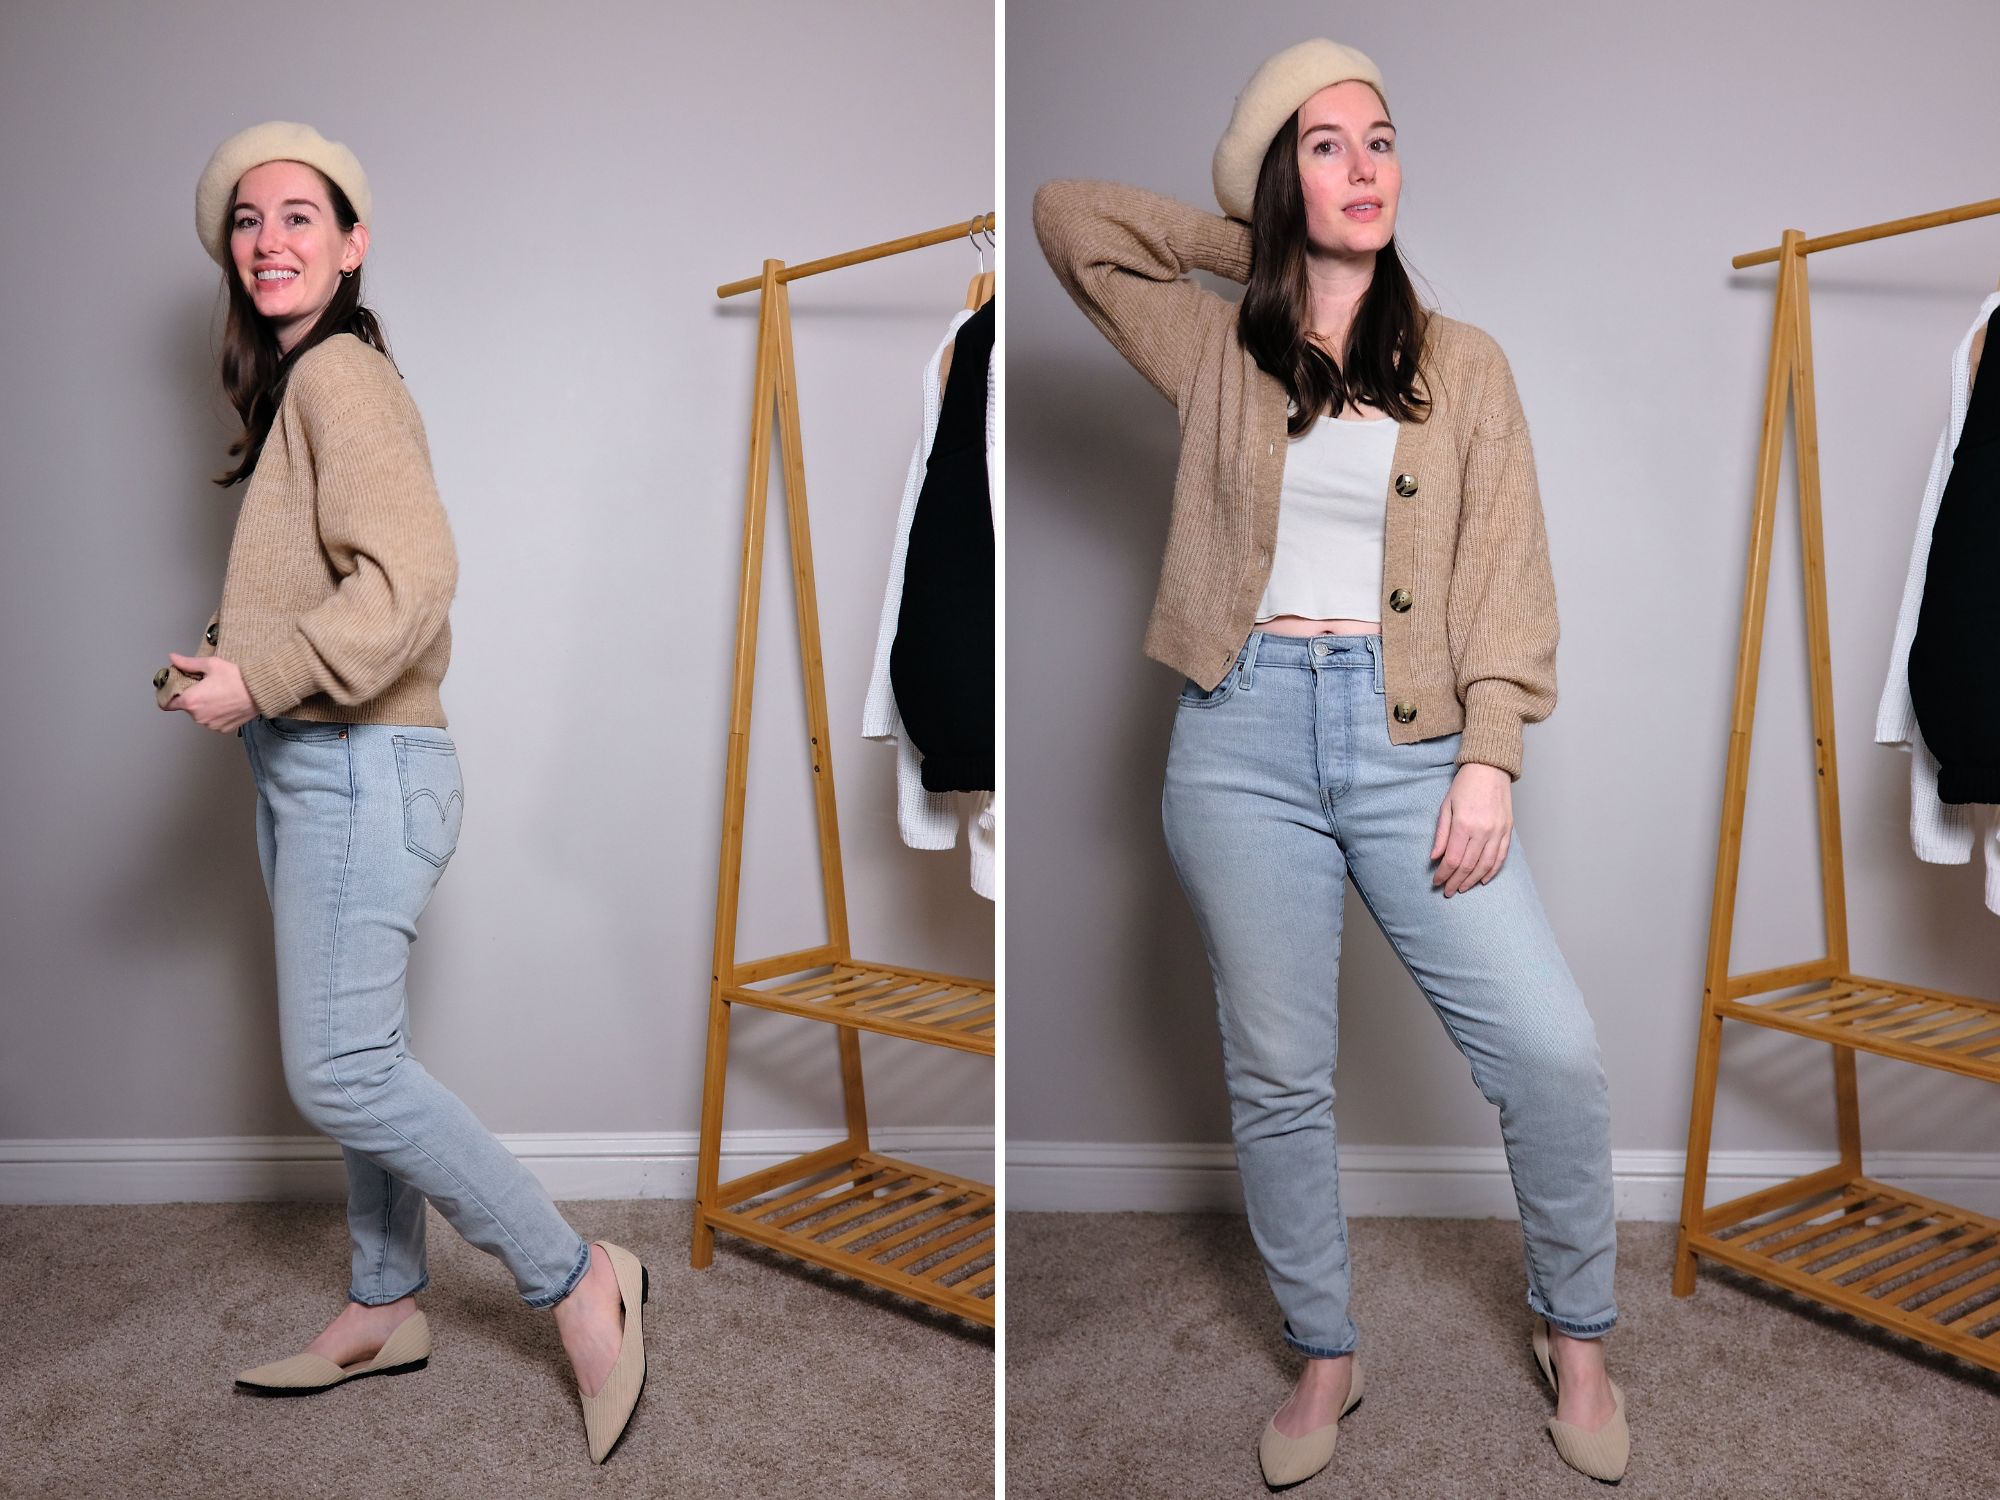 Alyssa pairs Quince's Alpaca Cardigan with jeans, a tank, and a beret